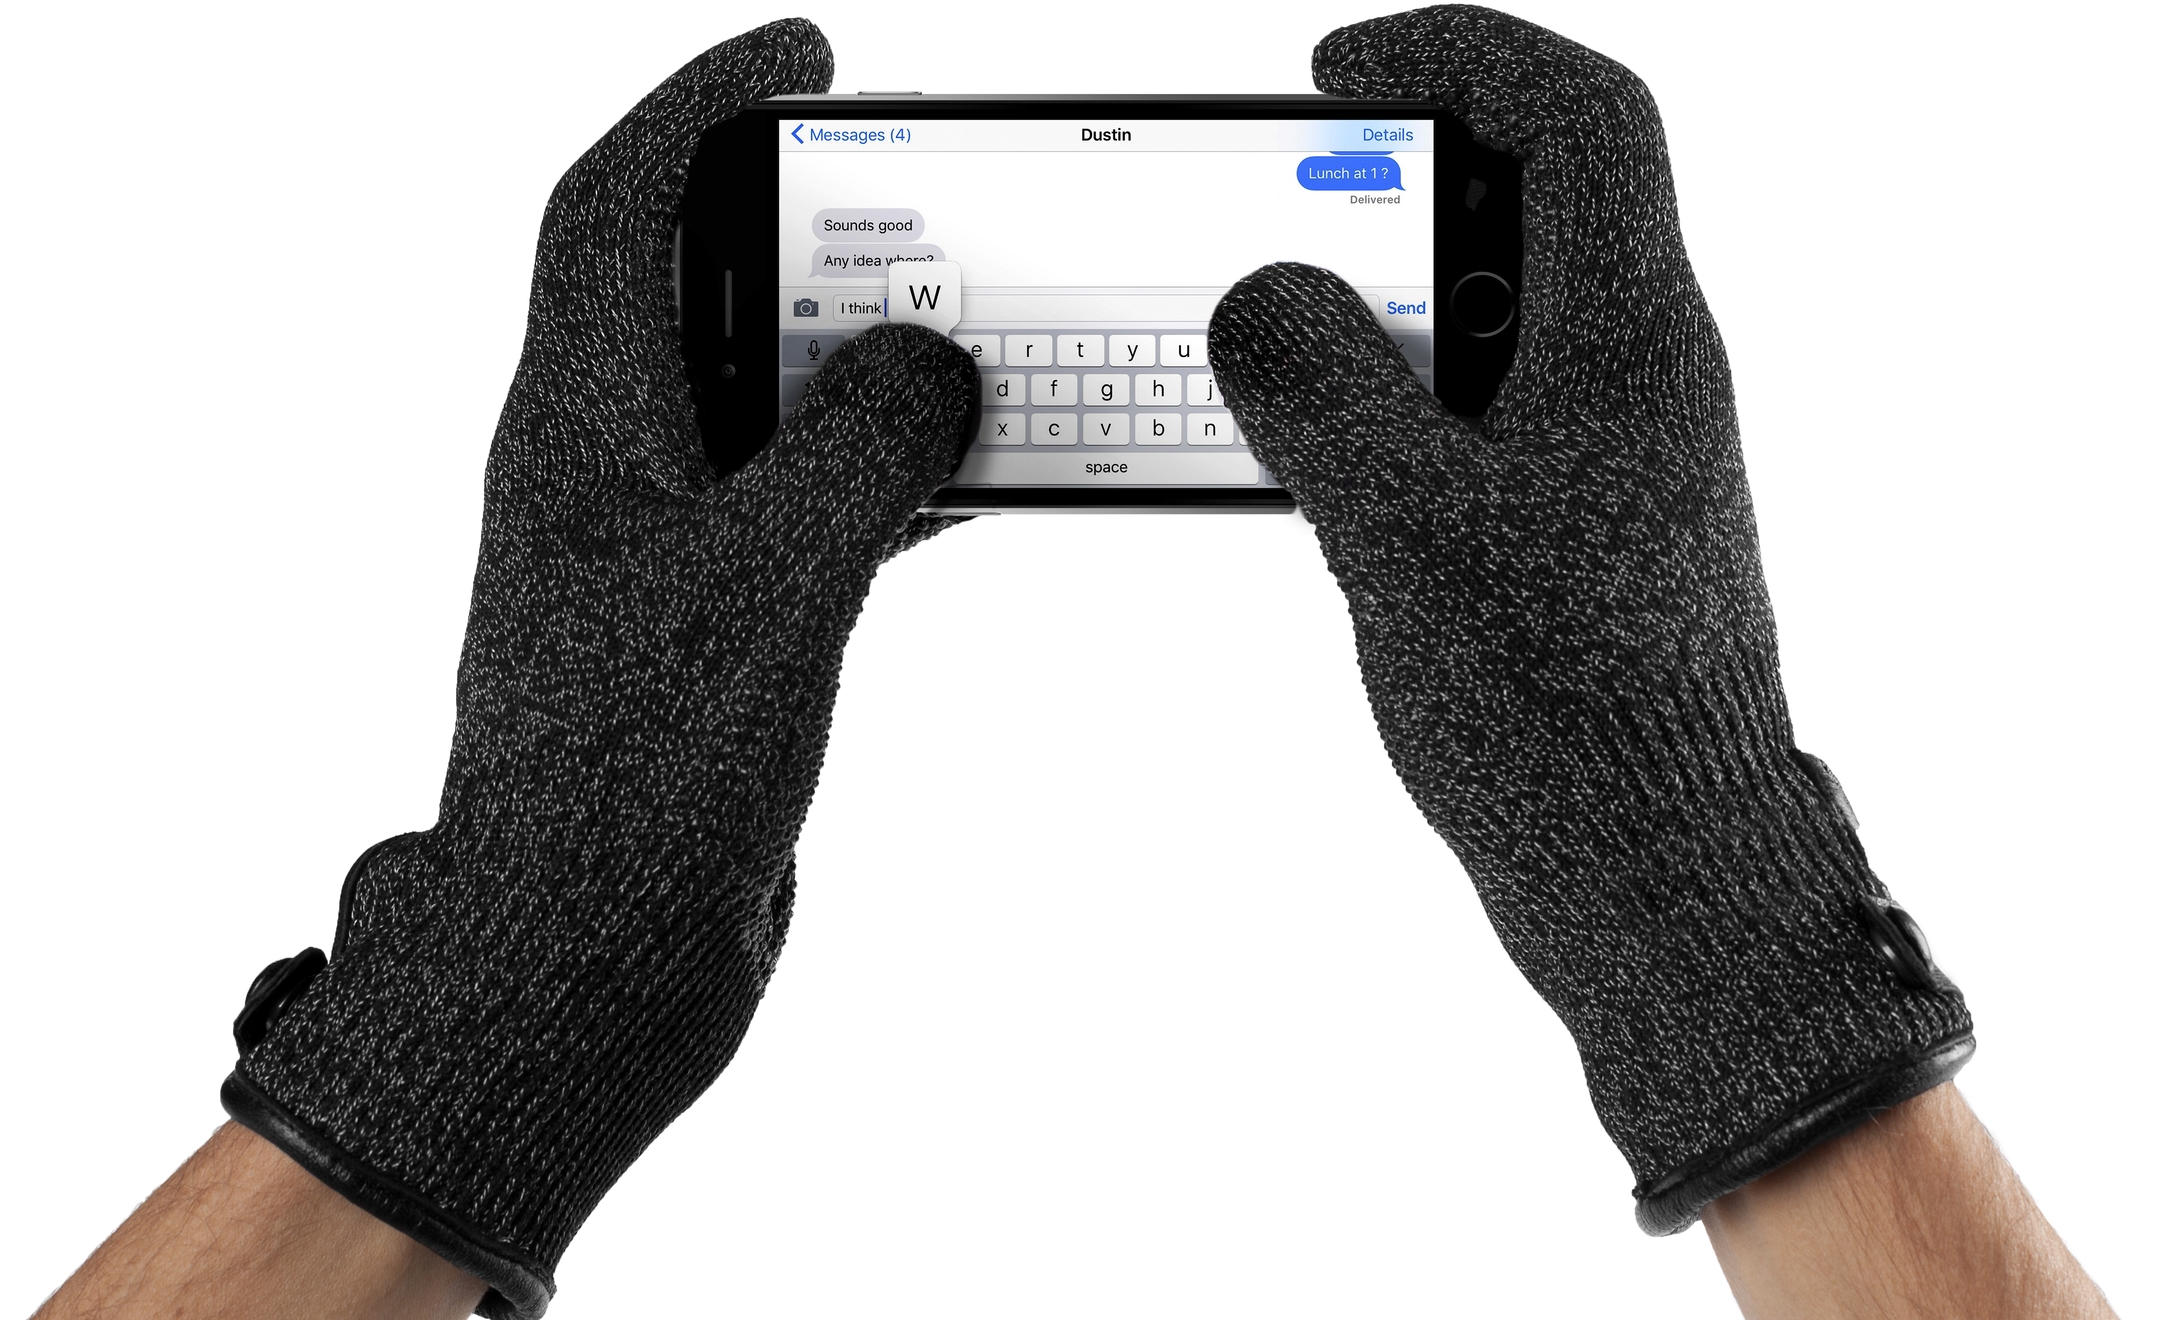 Mujjo Double Layered Touchscreen Gloves, $31